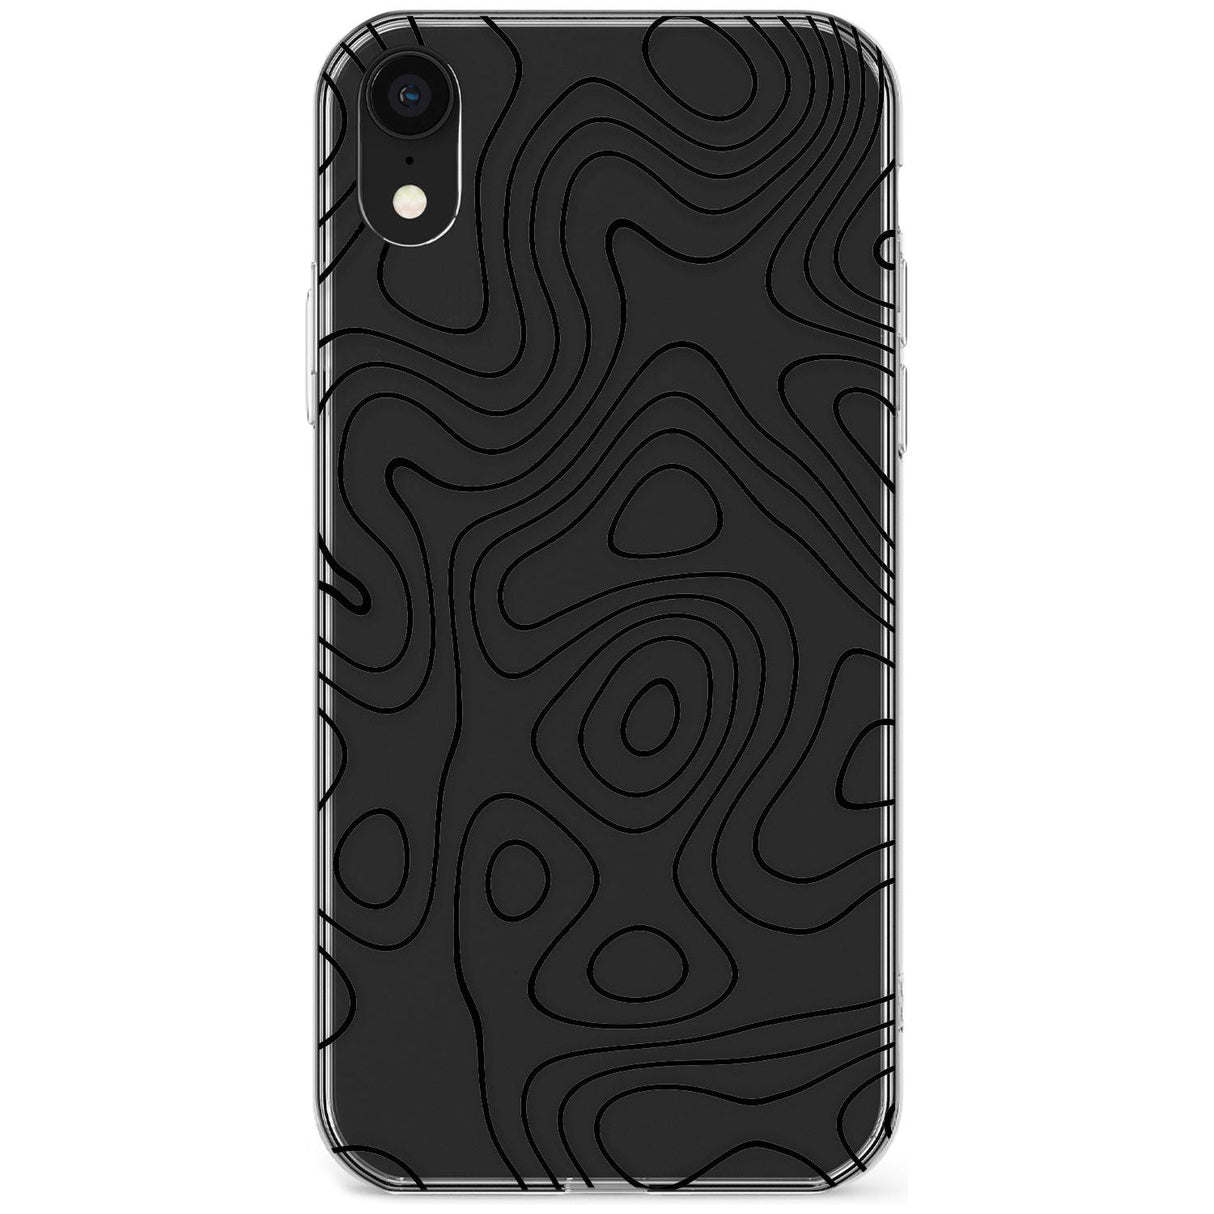 Damascus Steel Phone Case for iPhone X XS Max XR